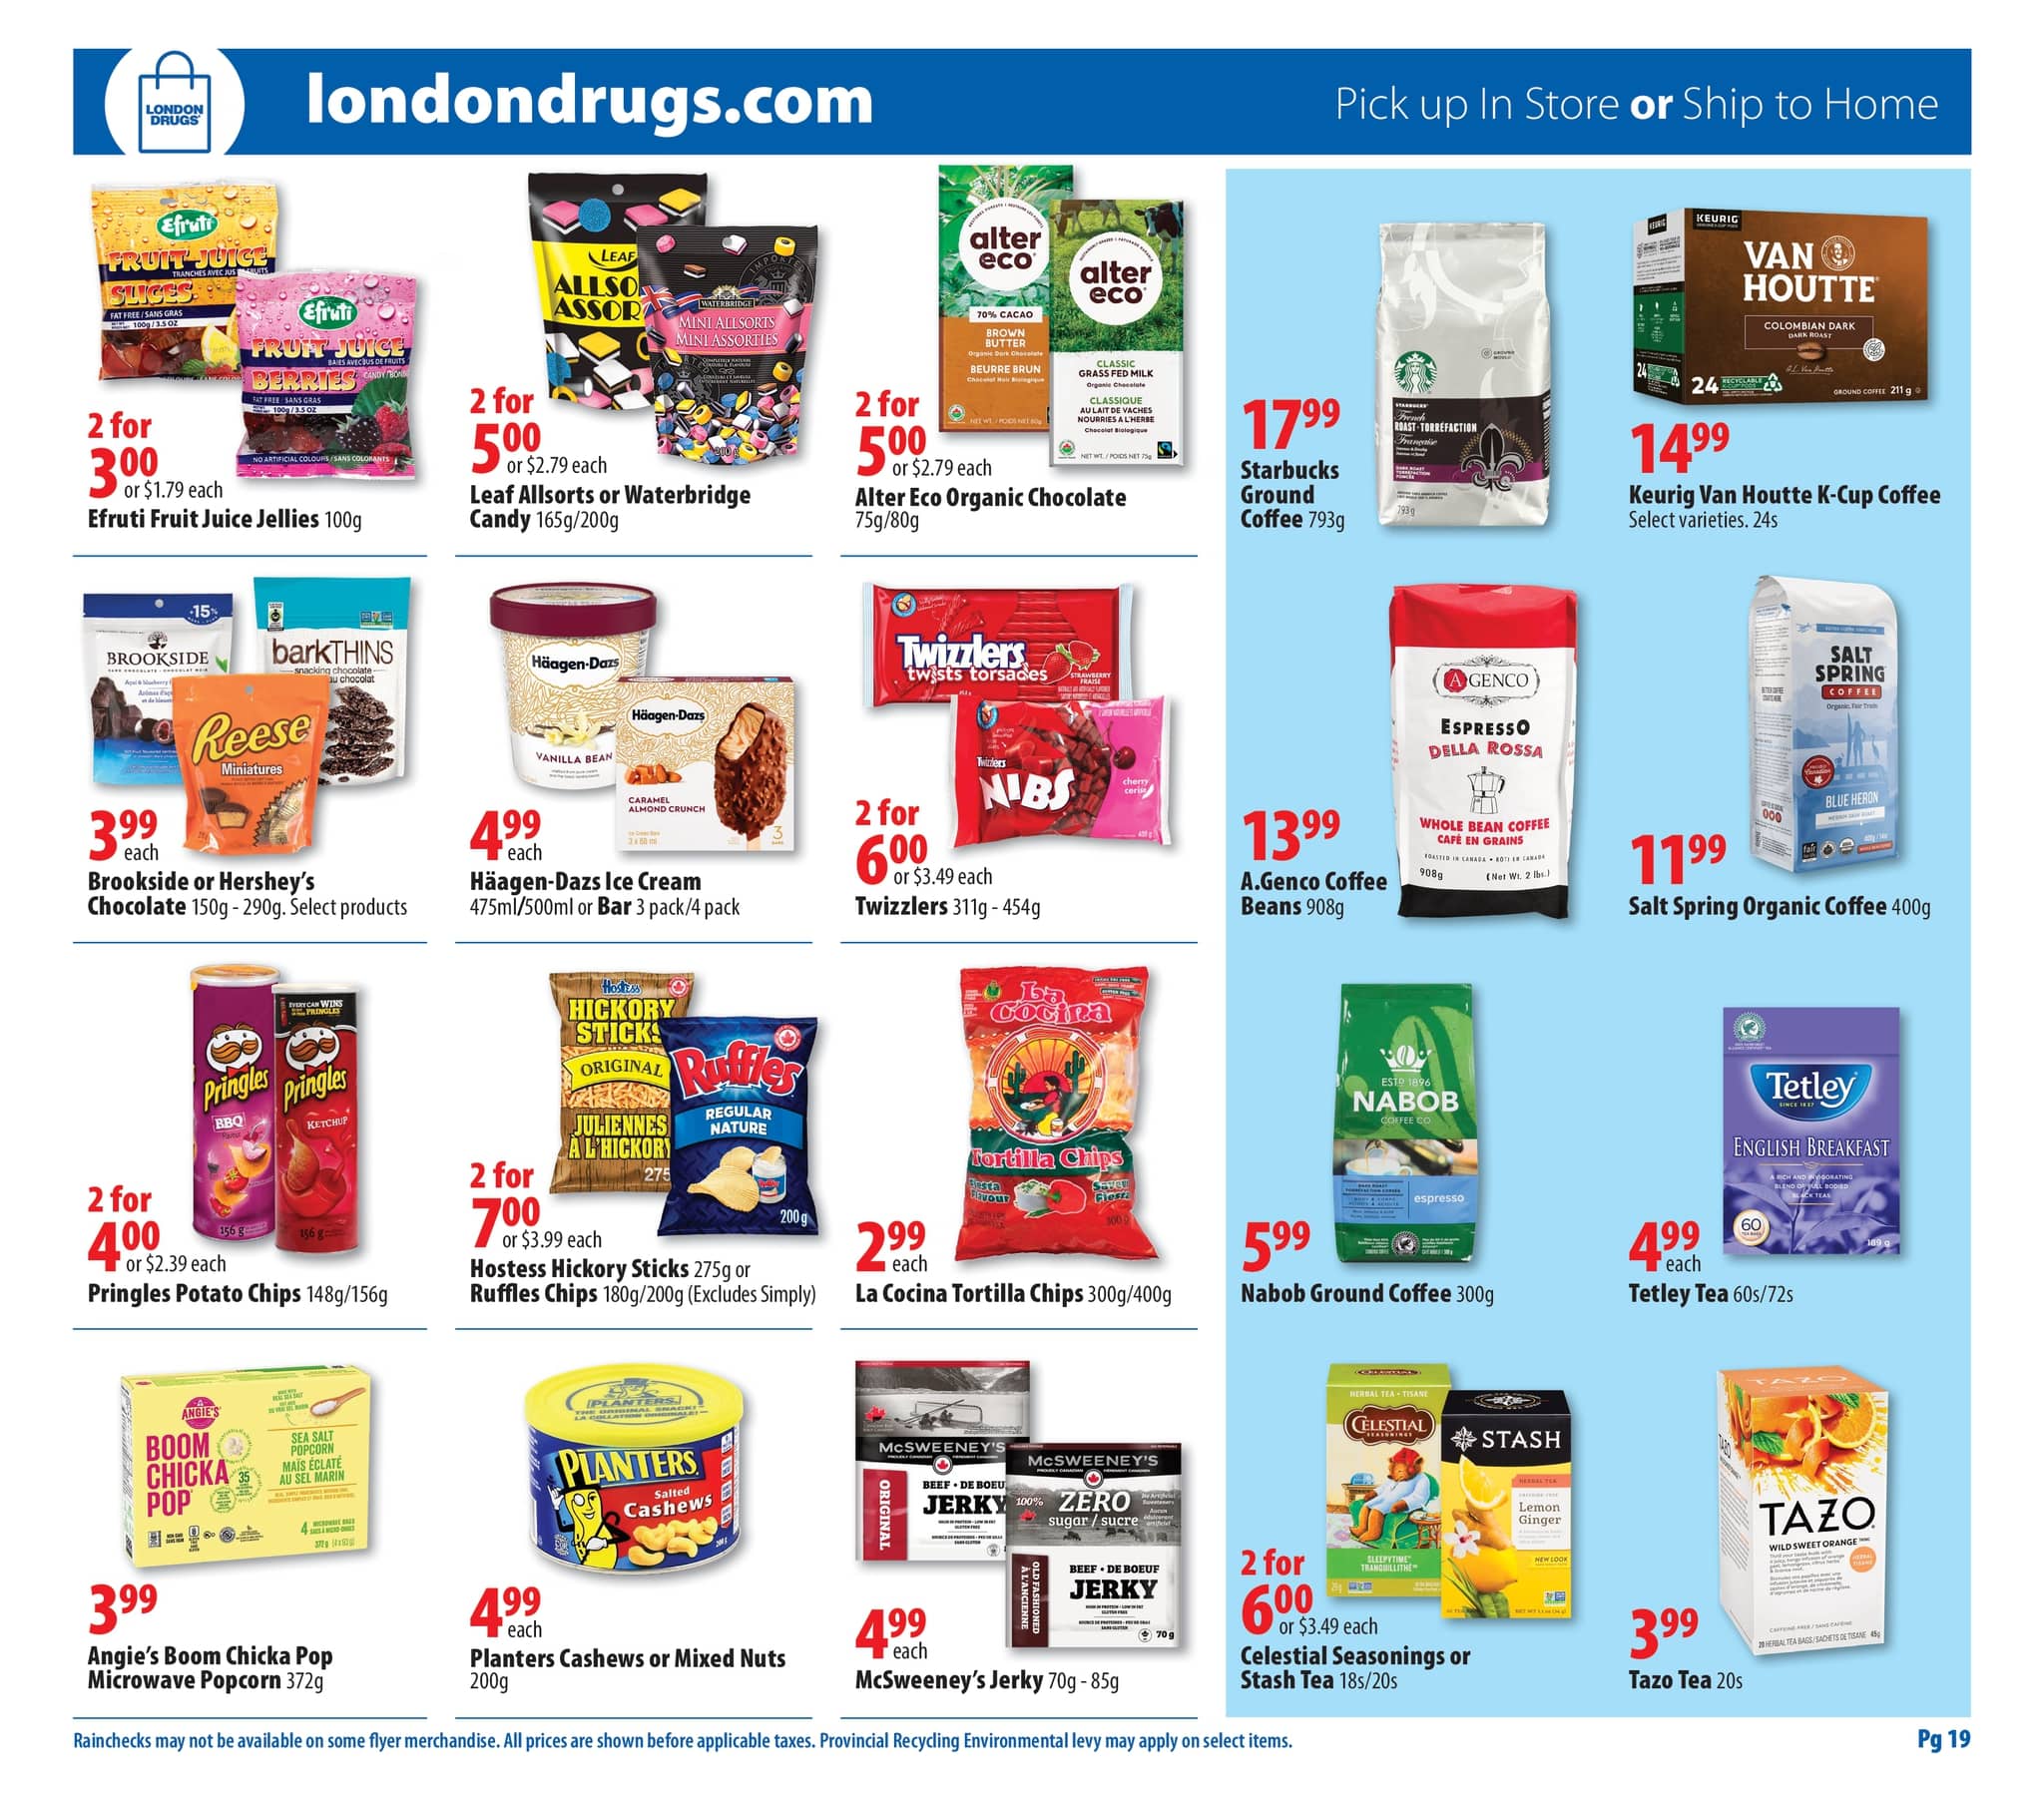 London Drugs - Weekly Flyer Specials - Page 19